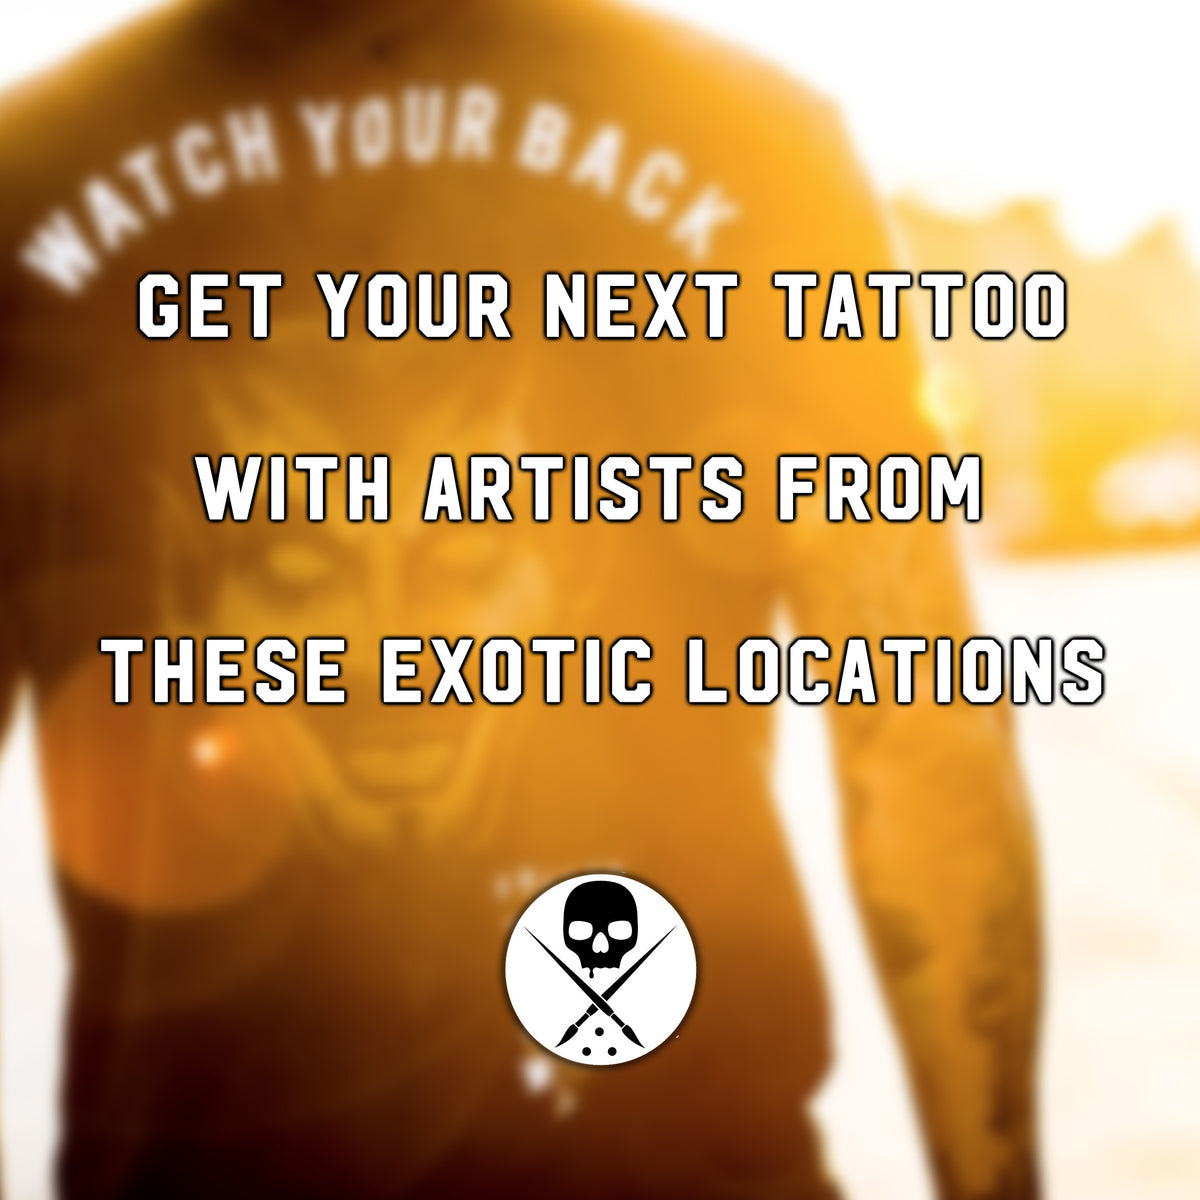 Get Your Next Tattoo With Artists From These Exotic Locations